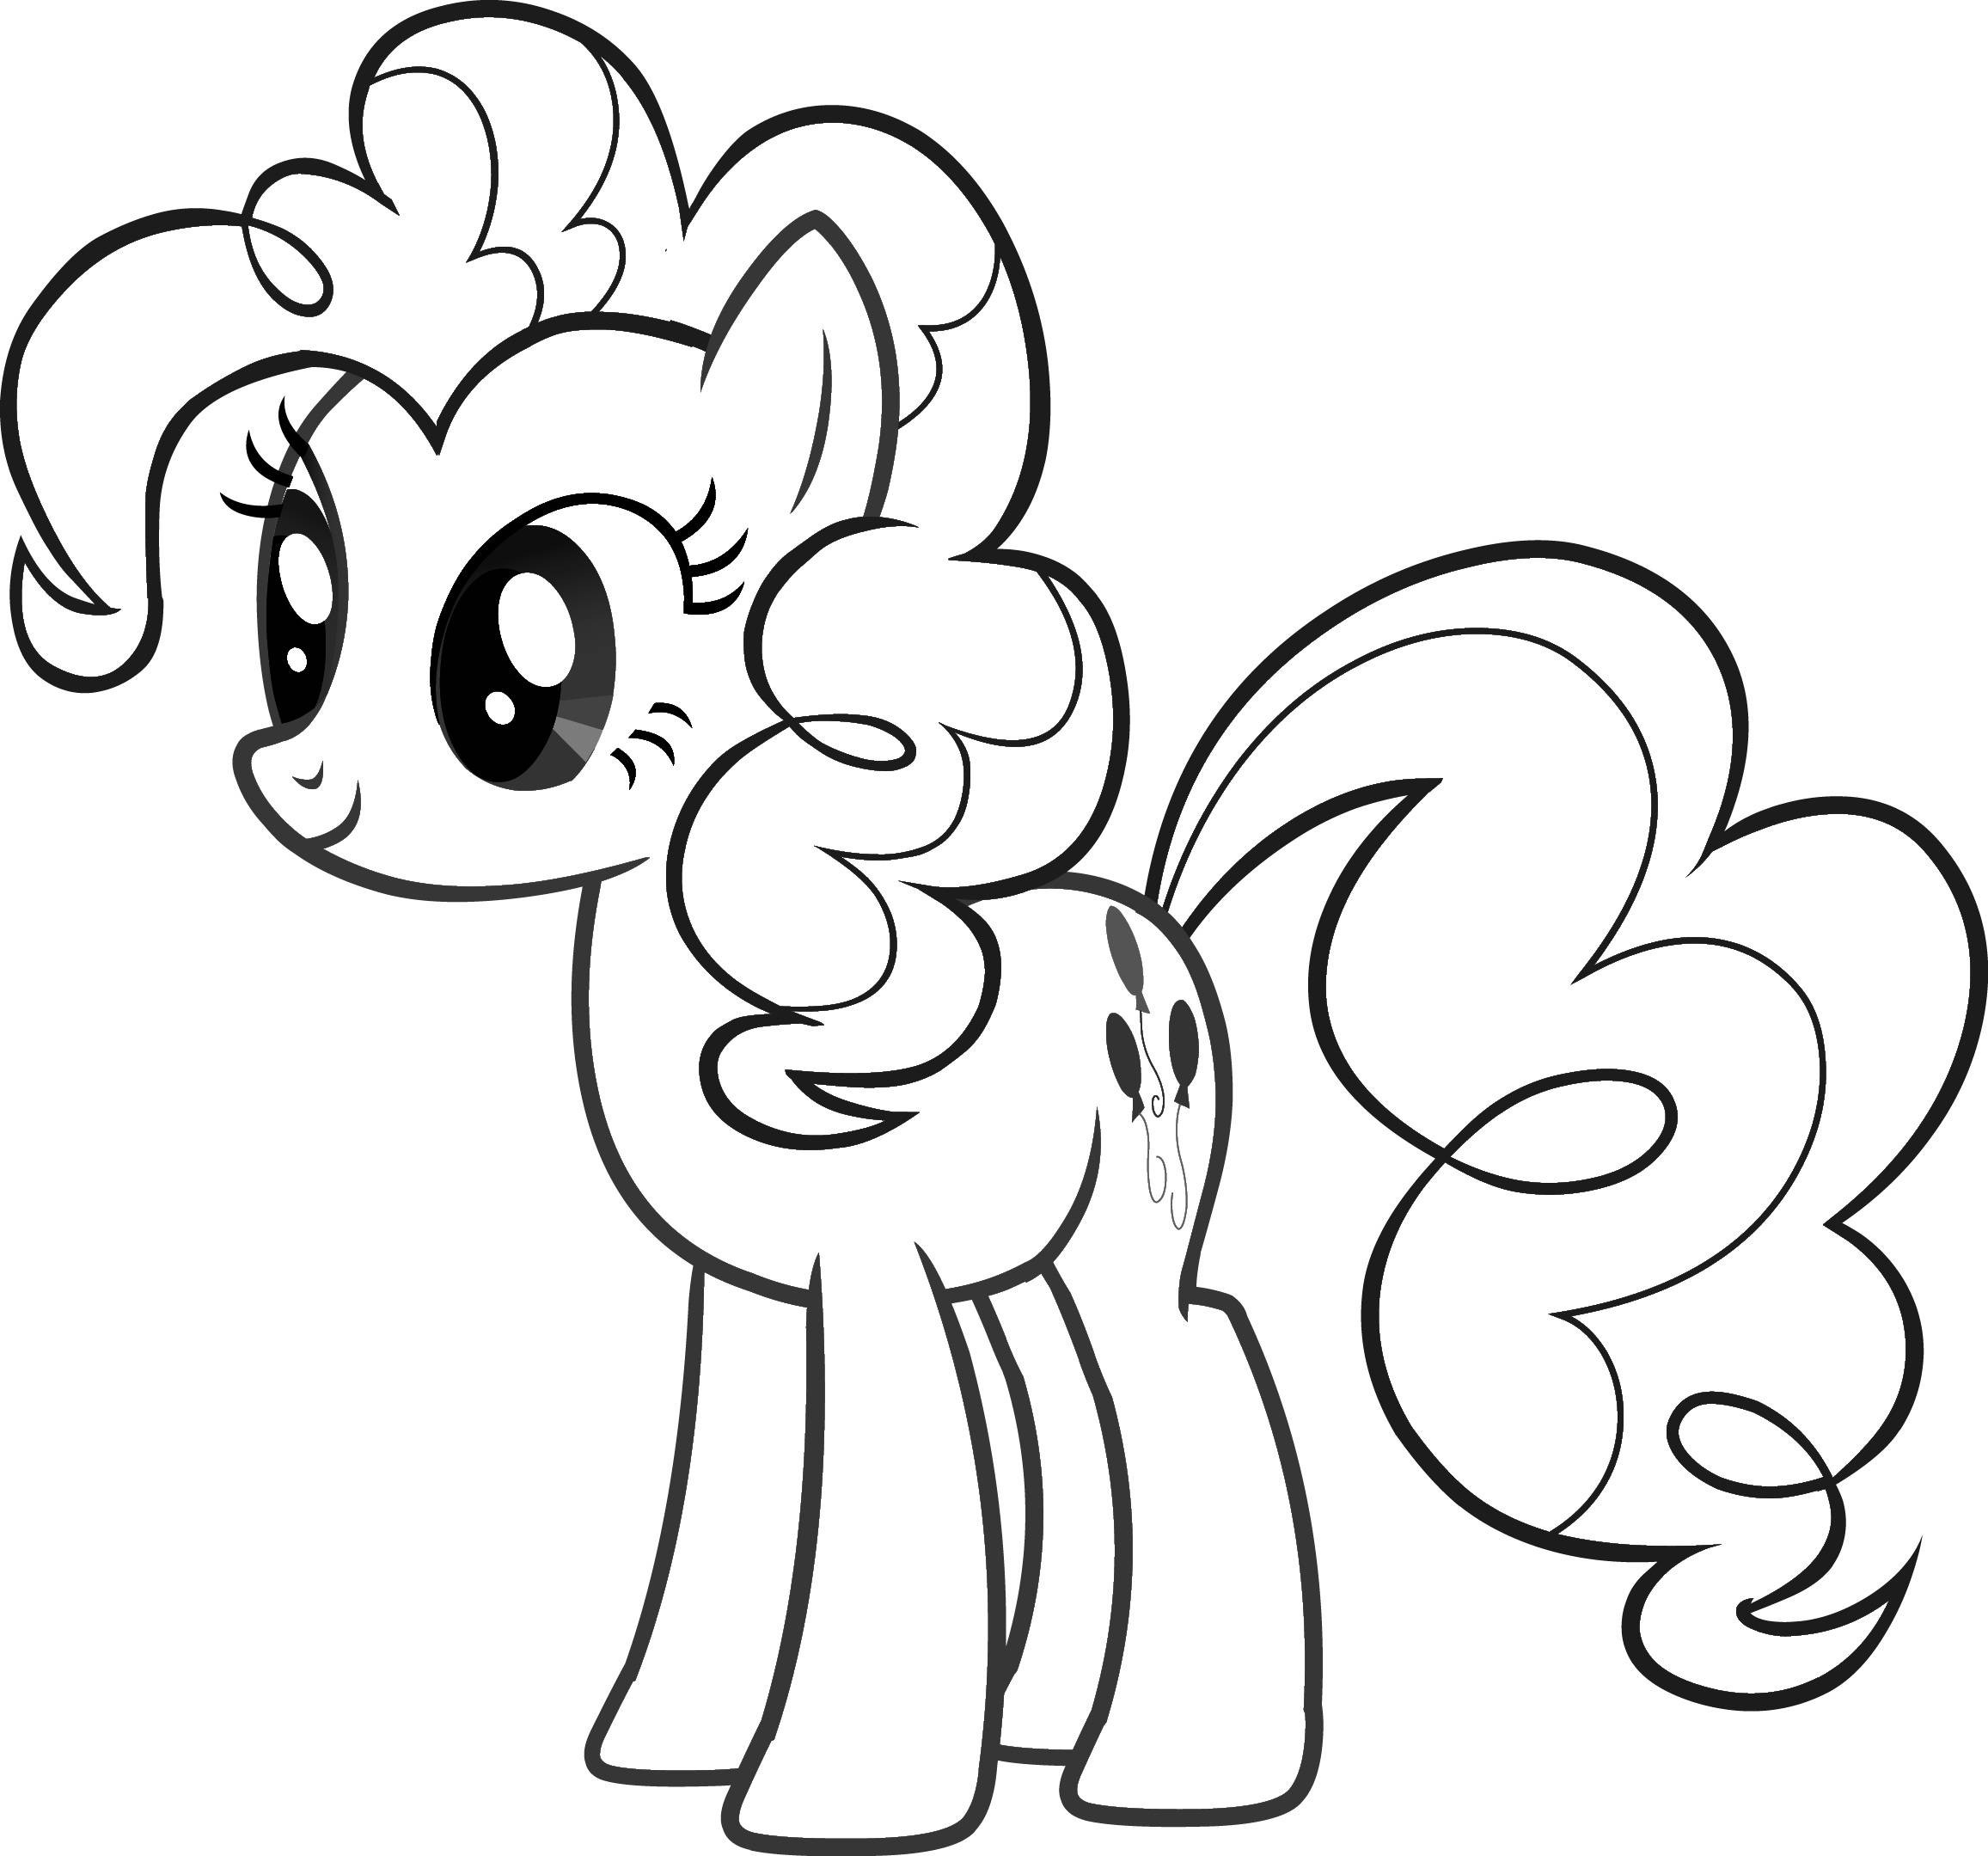 25 Of the Best Ideas for Kids Coloring Pages My Little Pony - Home